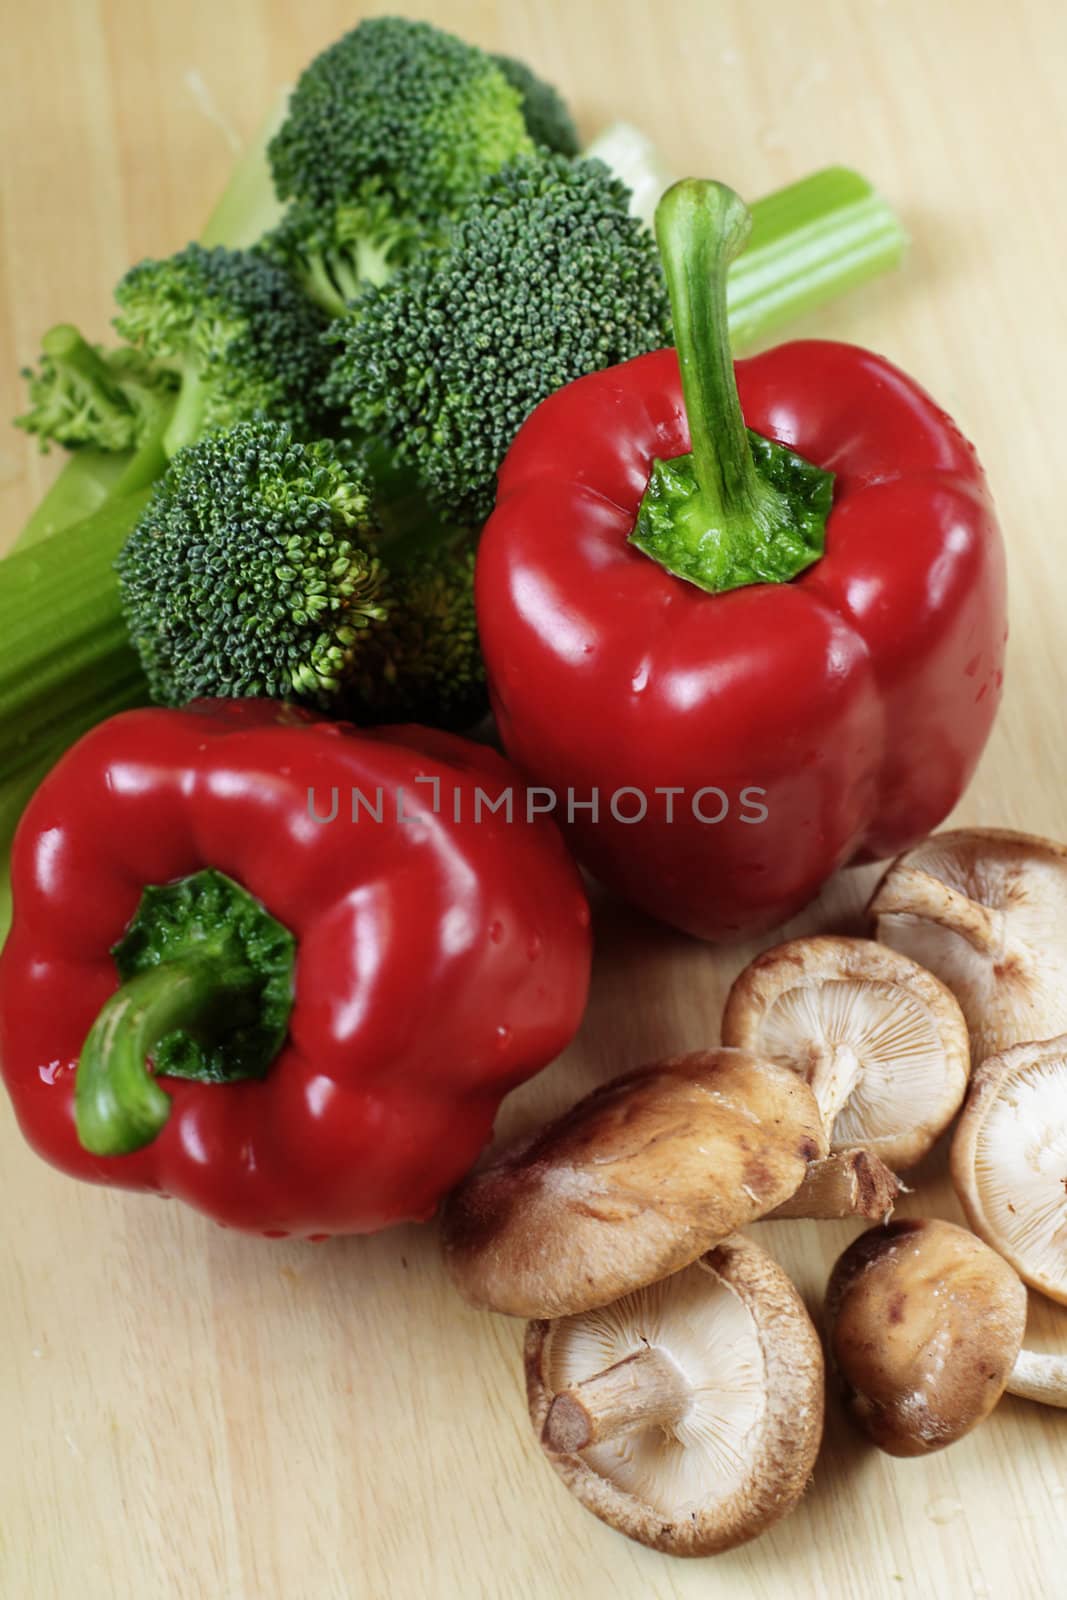 Vegetables on kitchen table: red peppers, broccoli, celery and shiitake mushrooms